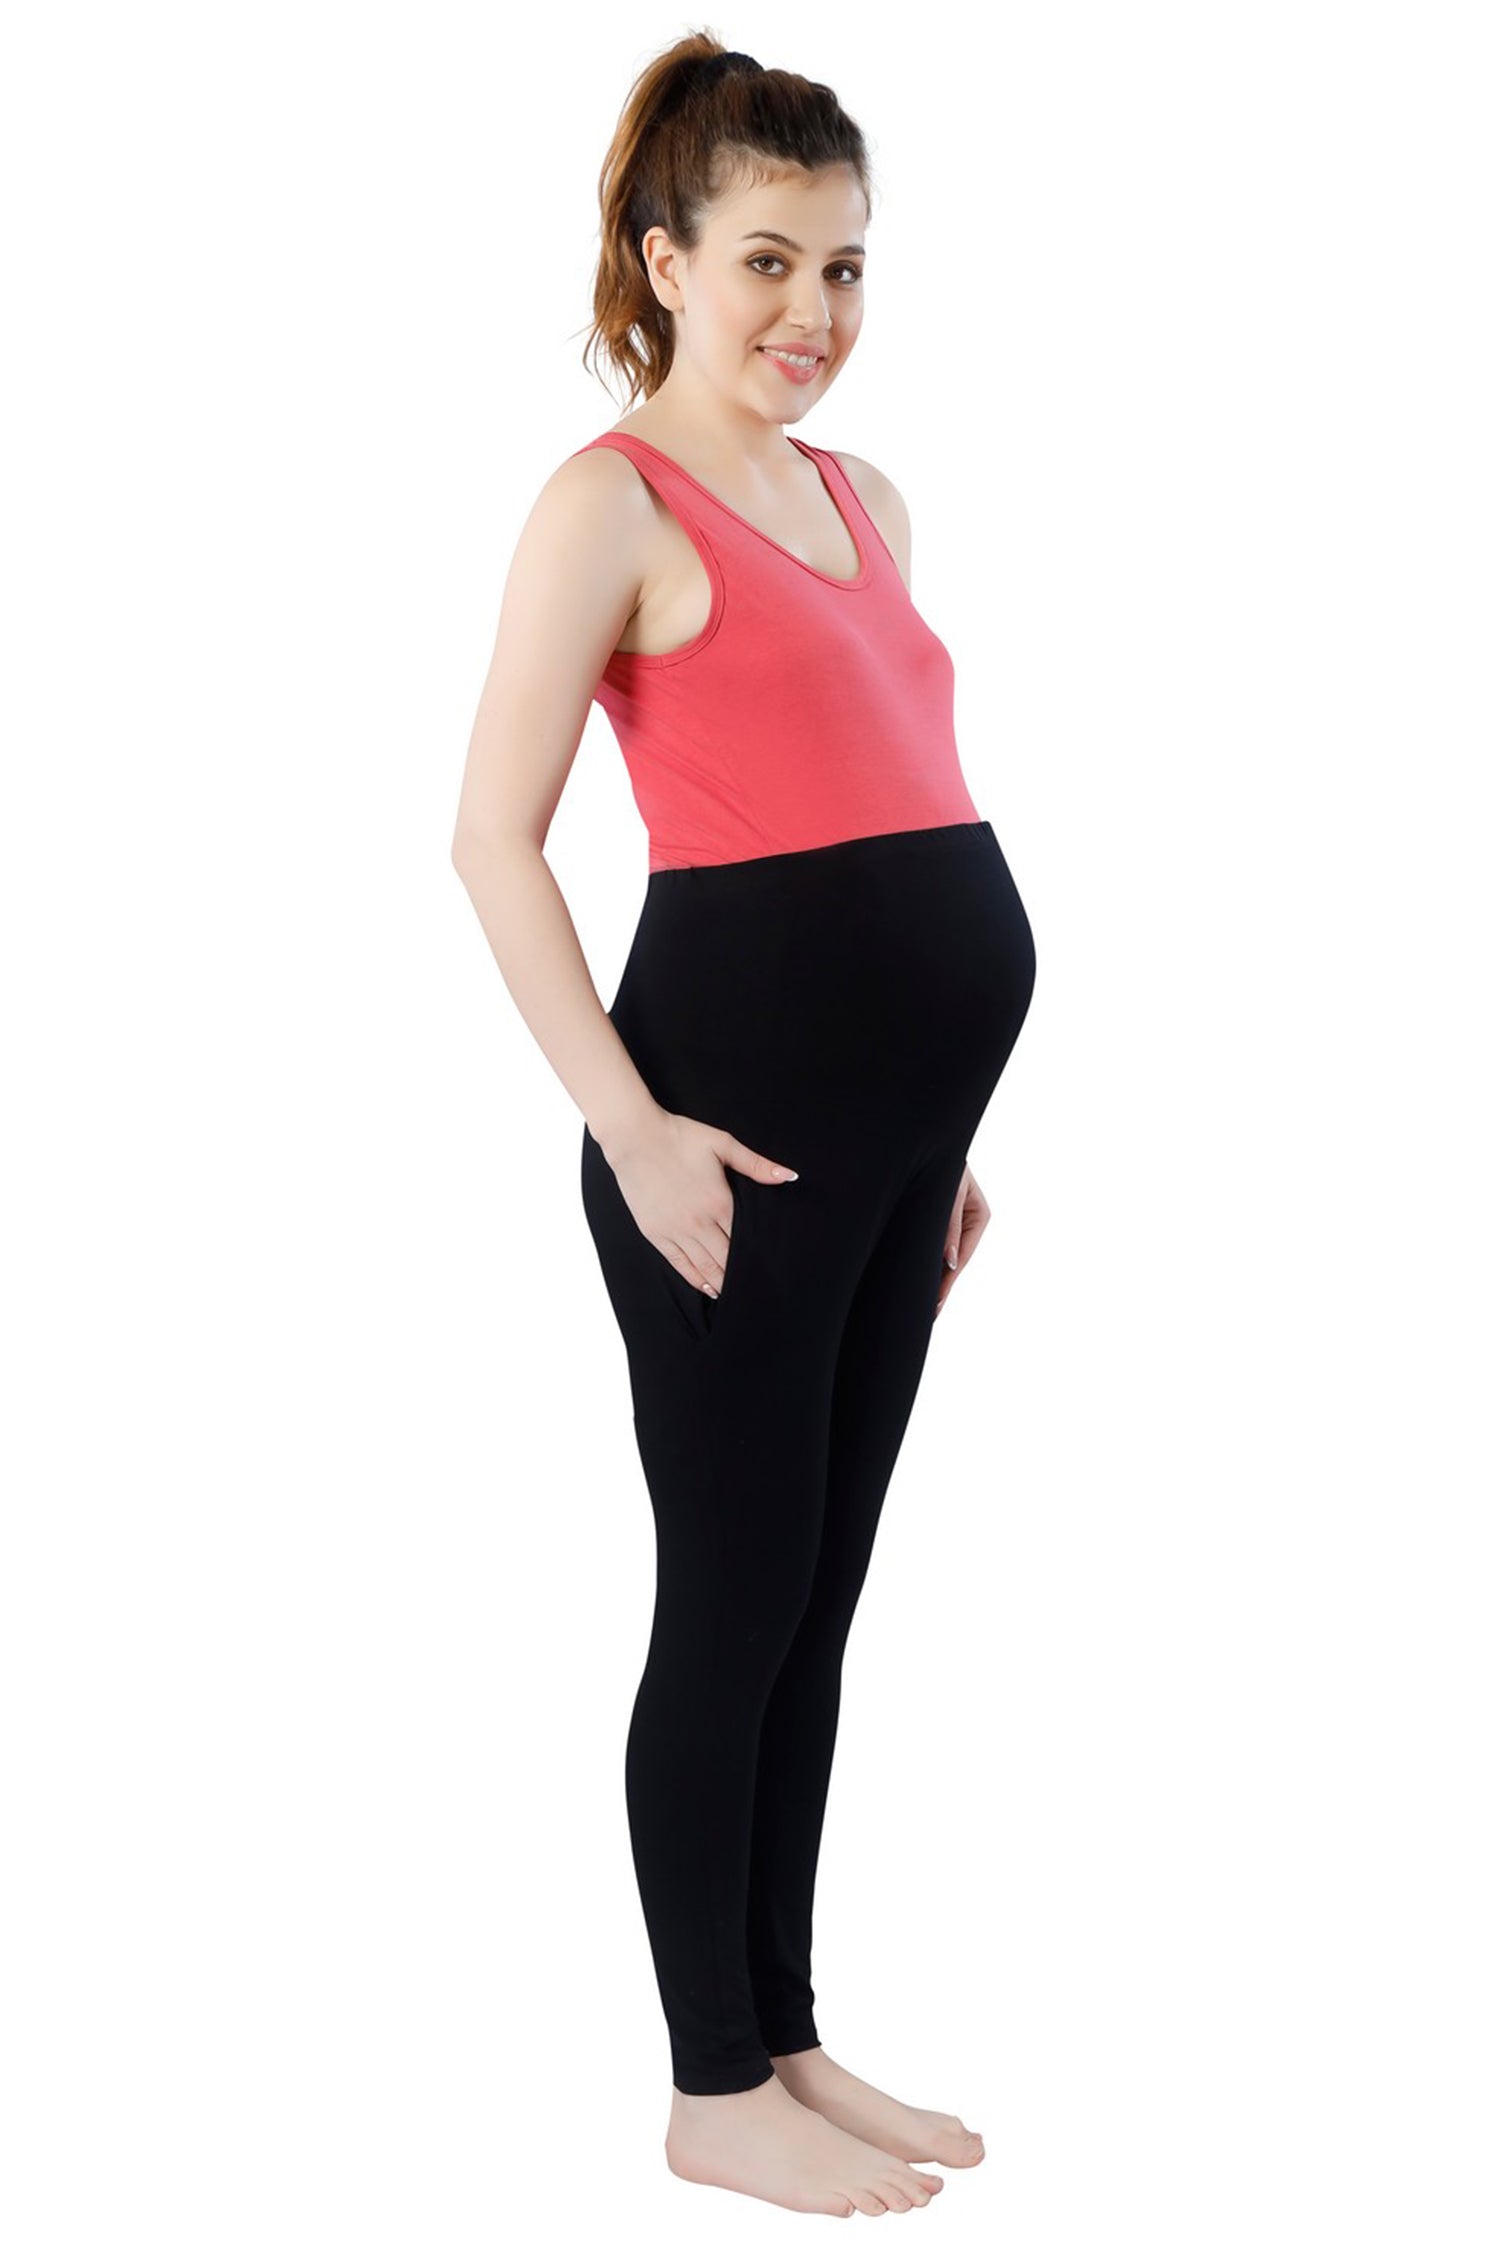 TRASA Women's Maternity Cotton Workout Leggings Over The Belly Pregnan –